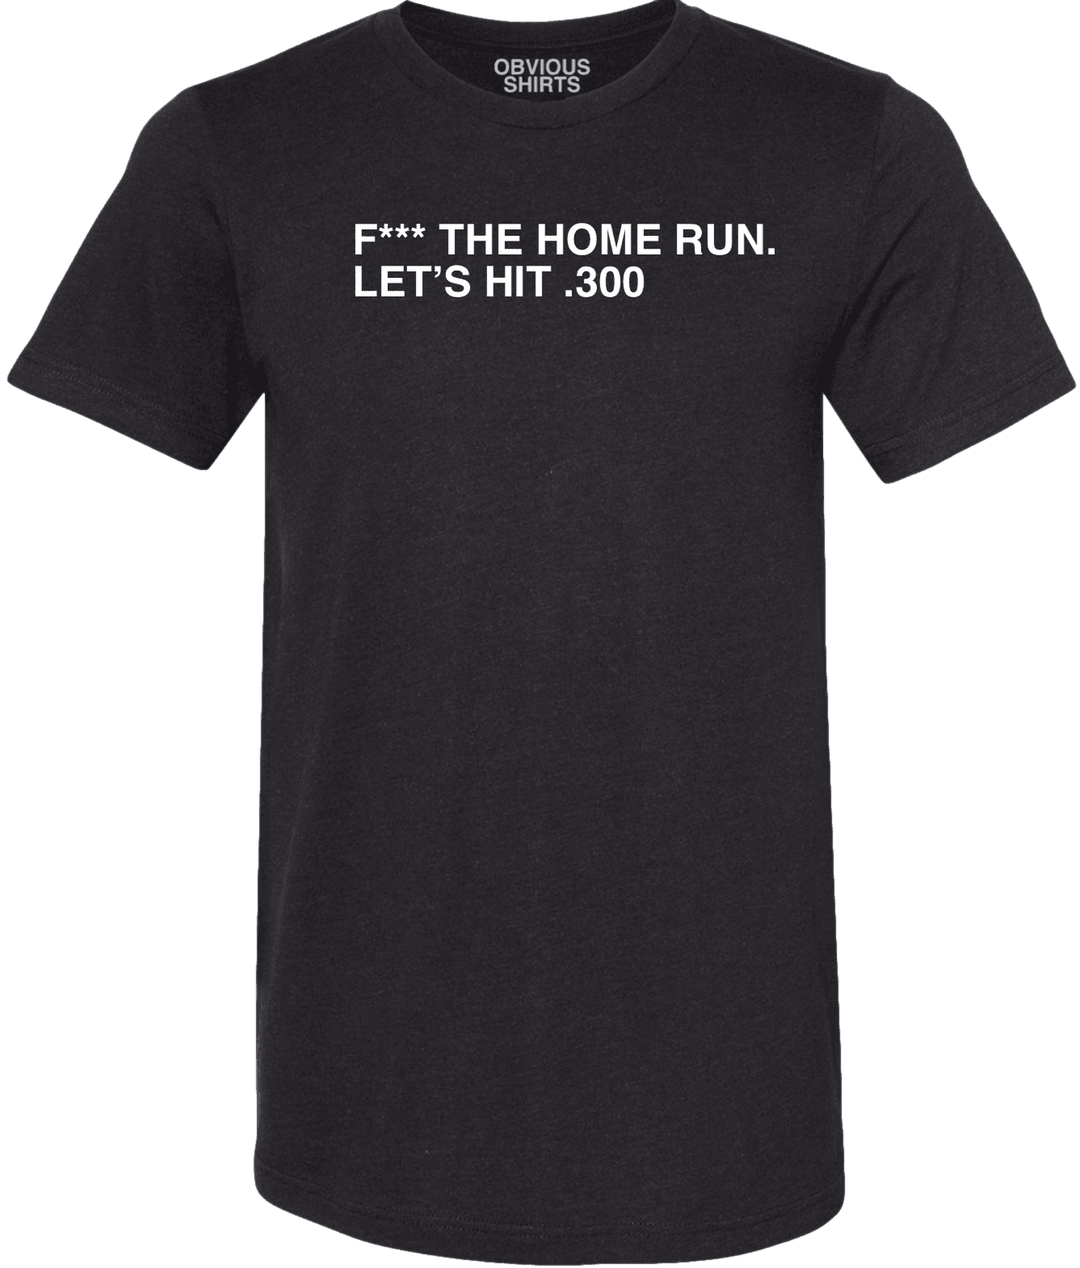 F*** THE HOME RUN. LET'S HIT .300 - OBVIOUS SHIRTS.